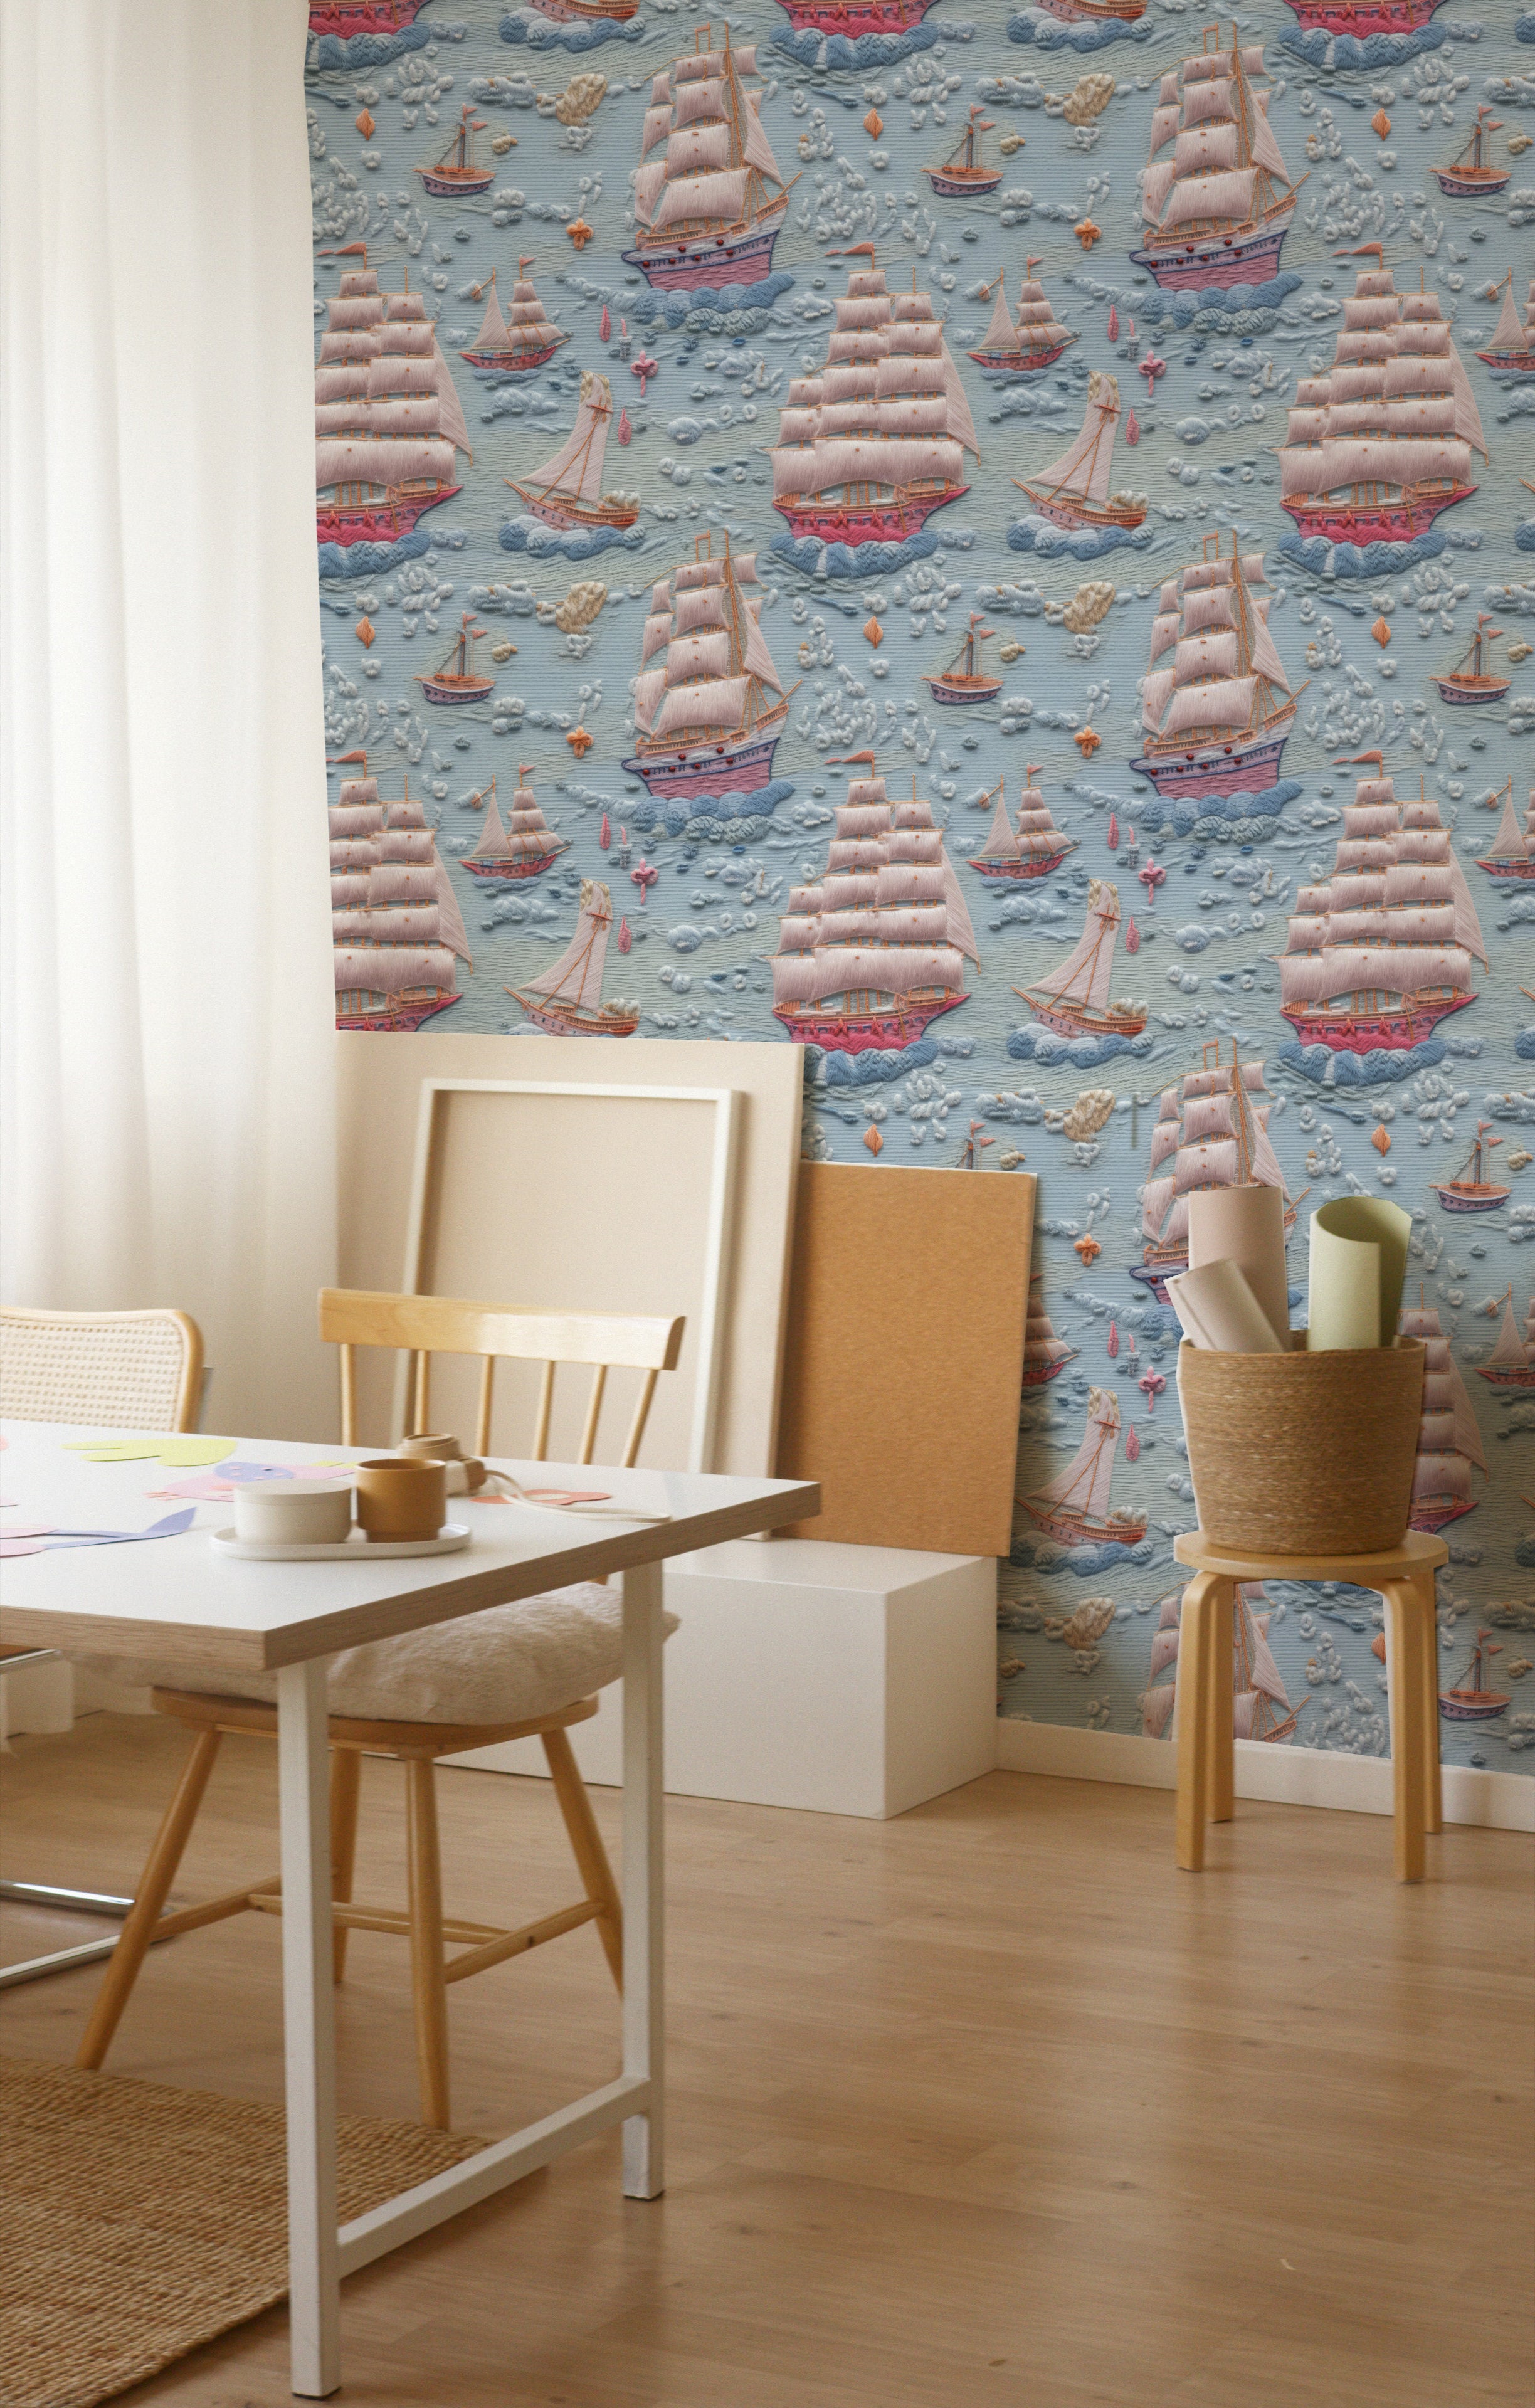 Workspace area enhanced by the Breezy Sail Wallpaper, featuring detailed depictions of sailboats that provide a creative backdrop, complementing the simple and modern furniture in the room.